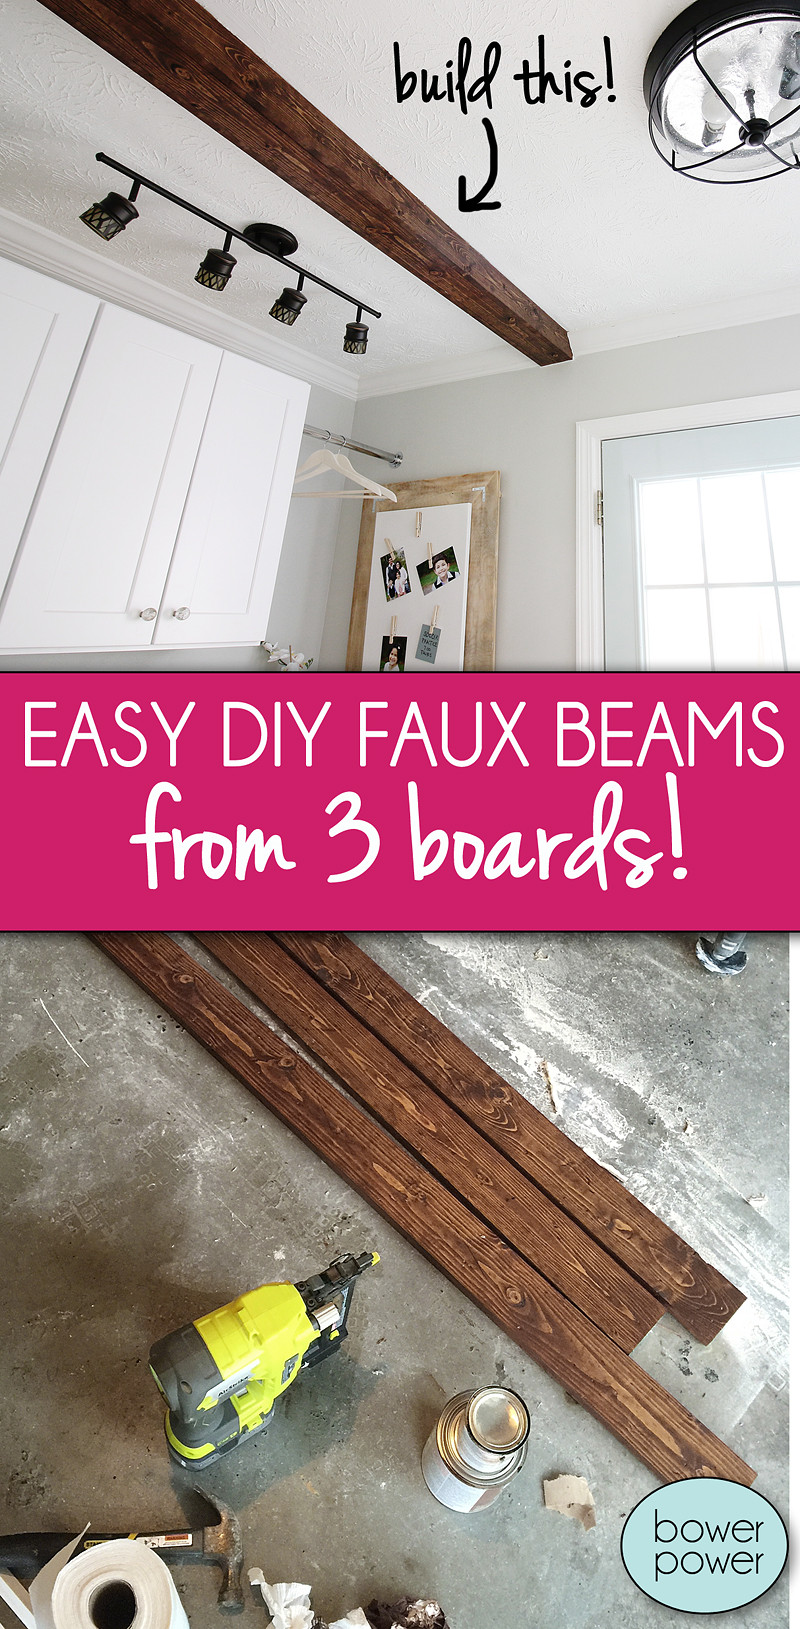 DIY Faux Wood Beams
 Beam Me Up Scotty Bower Power